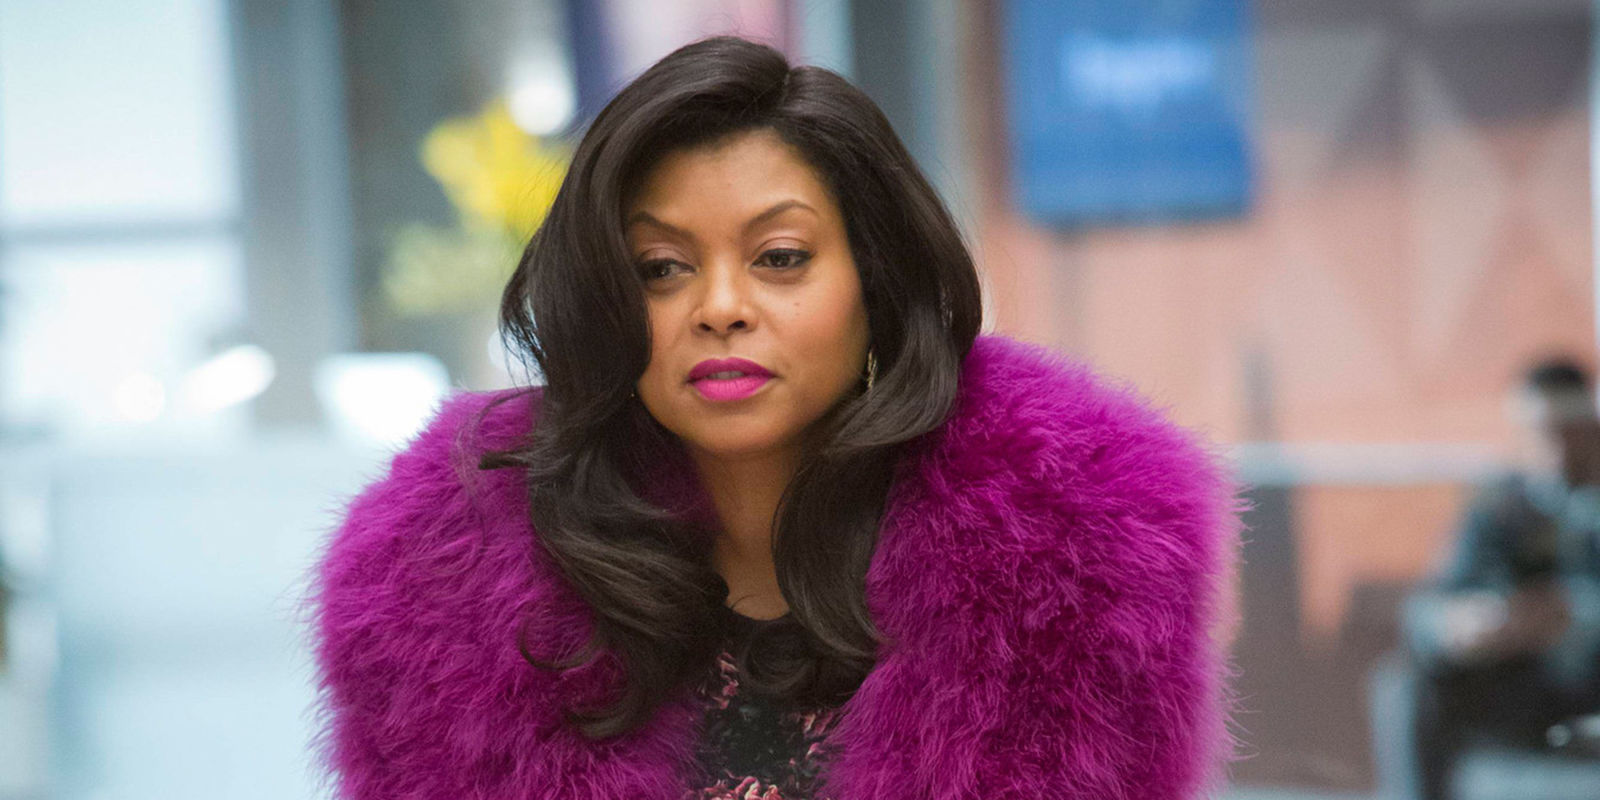 Looking for the best Empire Cookie Lyon quotes? Check out 10 of our favorite things that the show’s most stylish & sassy character has said over the seasons!